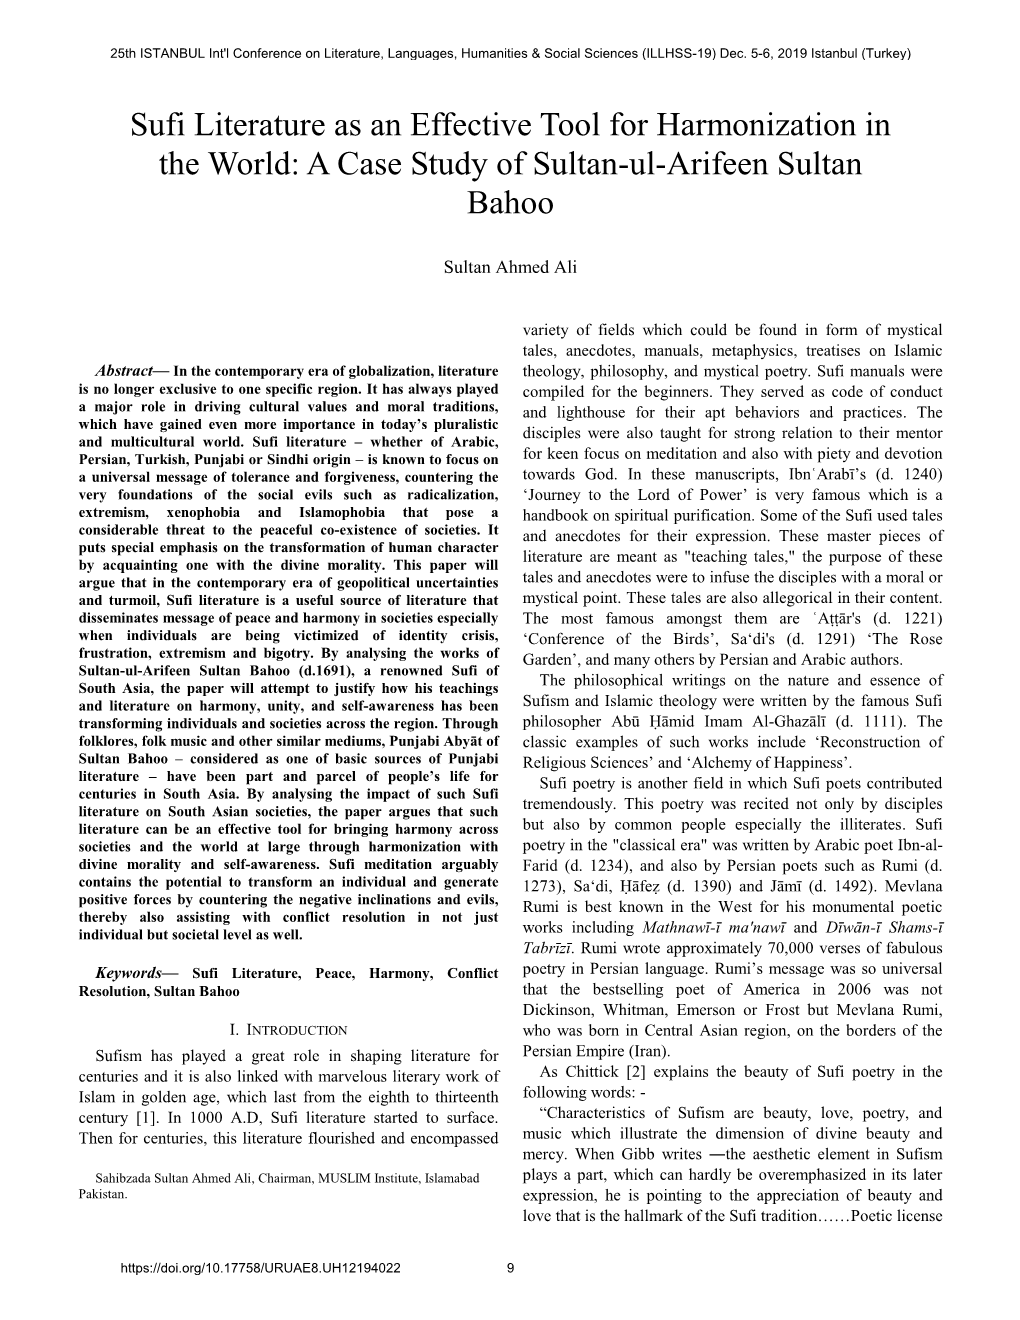 Sufi Literature As an Effective Tool for Harmonization in the World: a Case Study of Sultan-Ul-Arifeen Sultan Bahoo